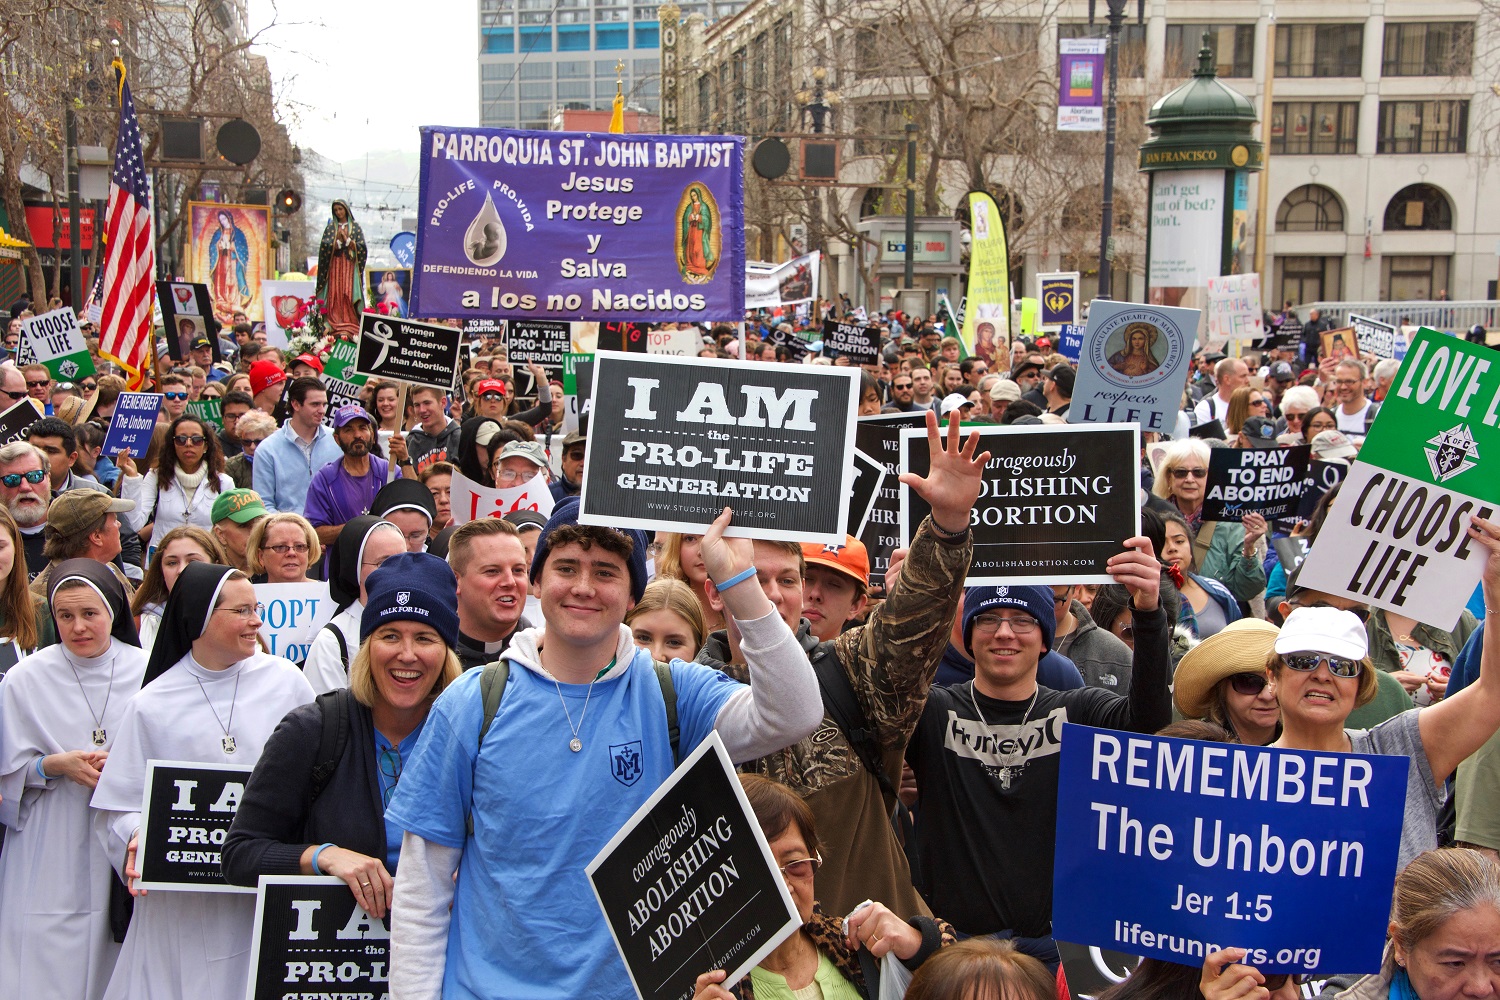 Pro-life? You’re Probably Profiting from Abortion - post